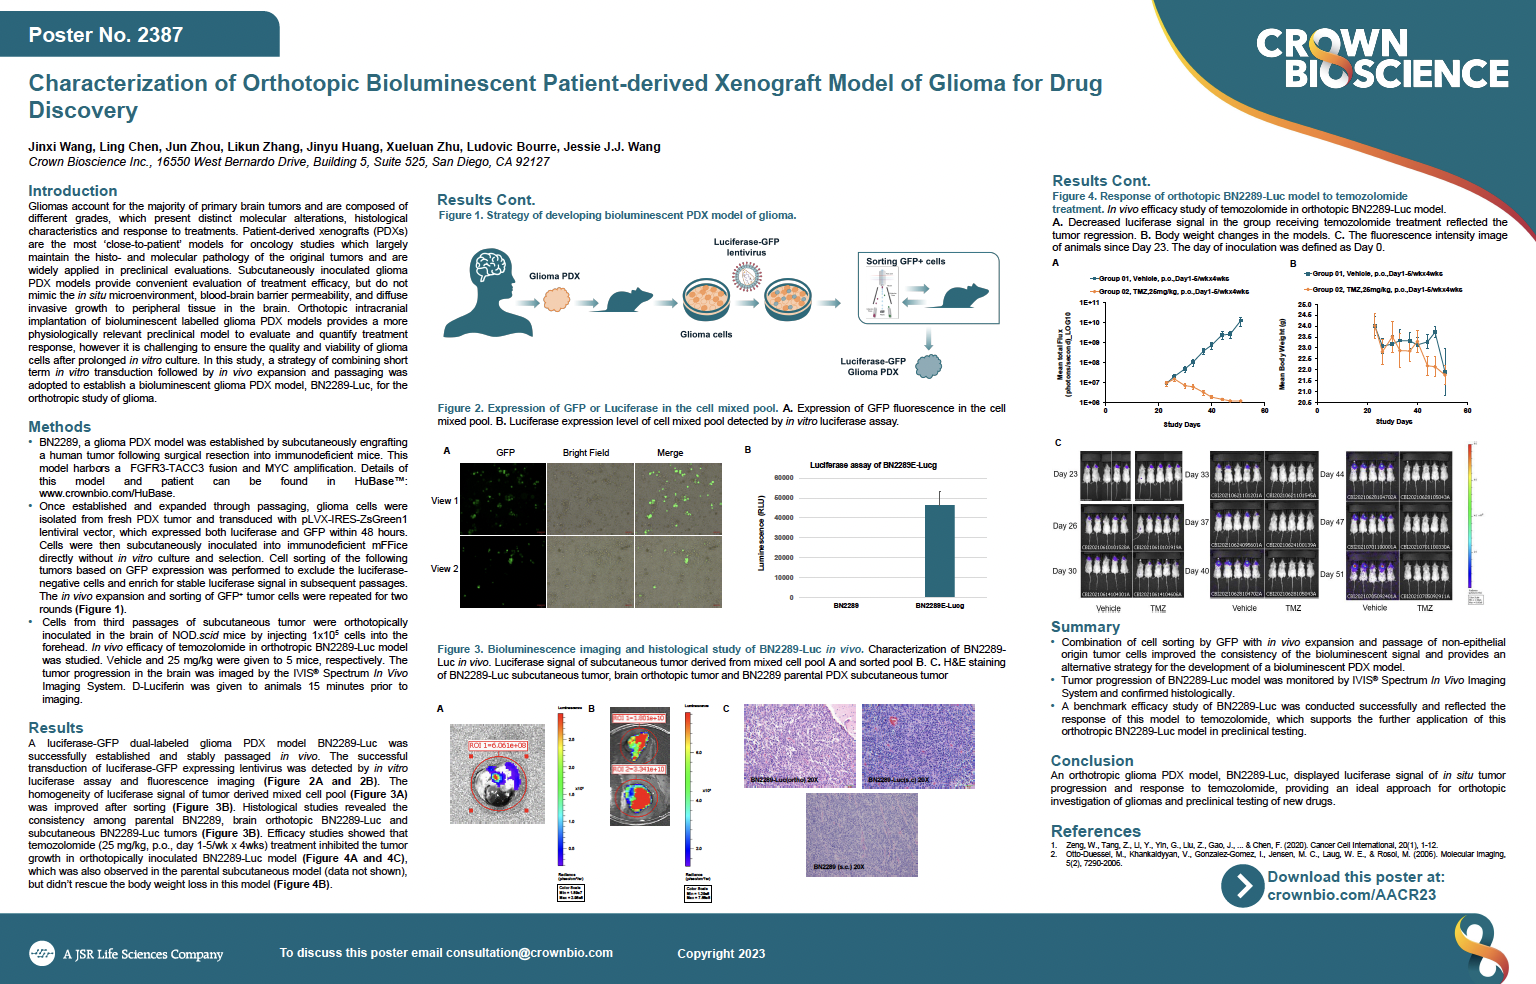 AACR 2023 Posters 2387: Characterization of Orthotopic Bioluminescent Patient-derived Xenografts Model of Glioma for Drug Discovery